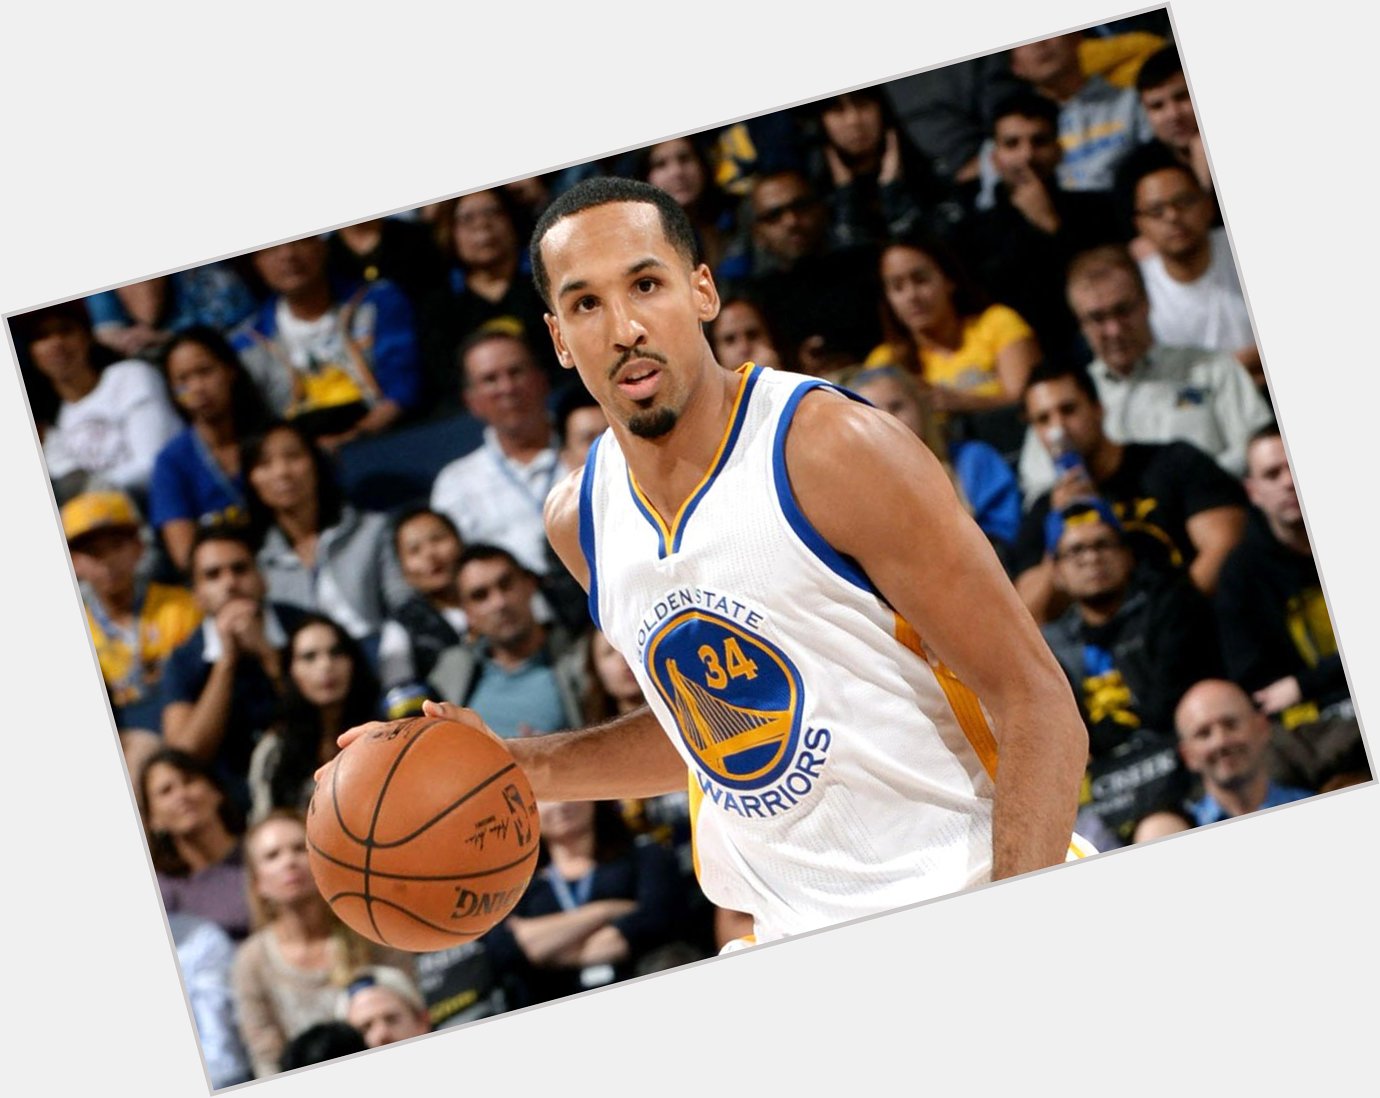 We would like to wish a happy 30th birthday to guard Shaun Livingston! 